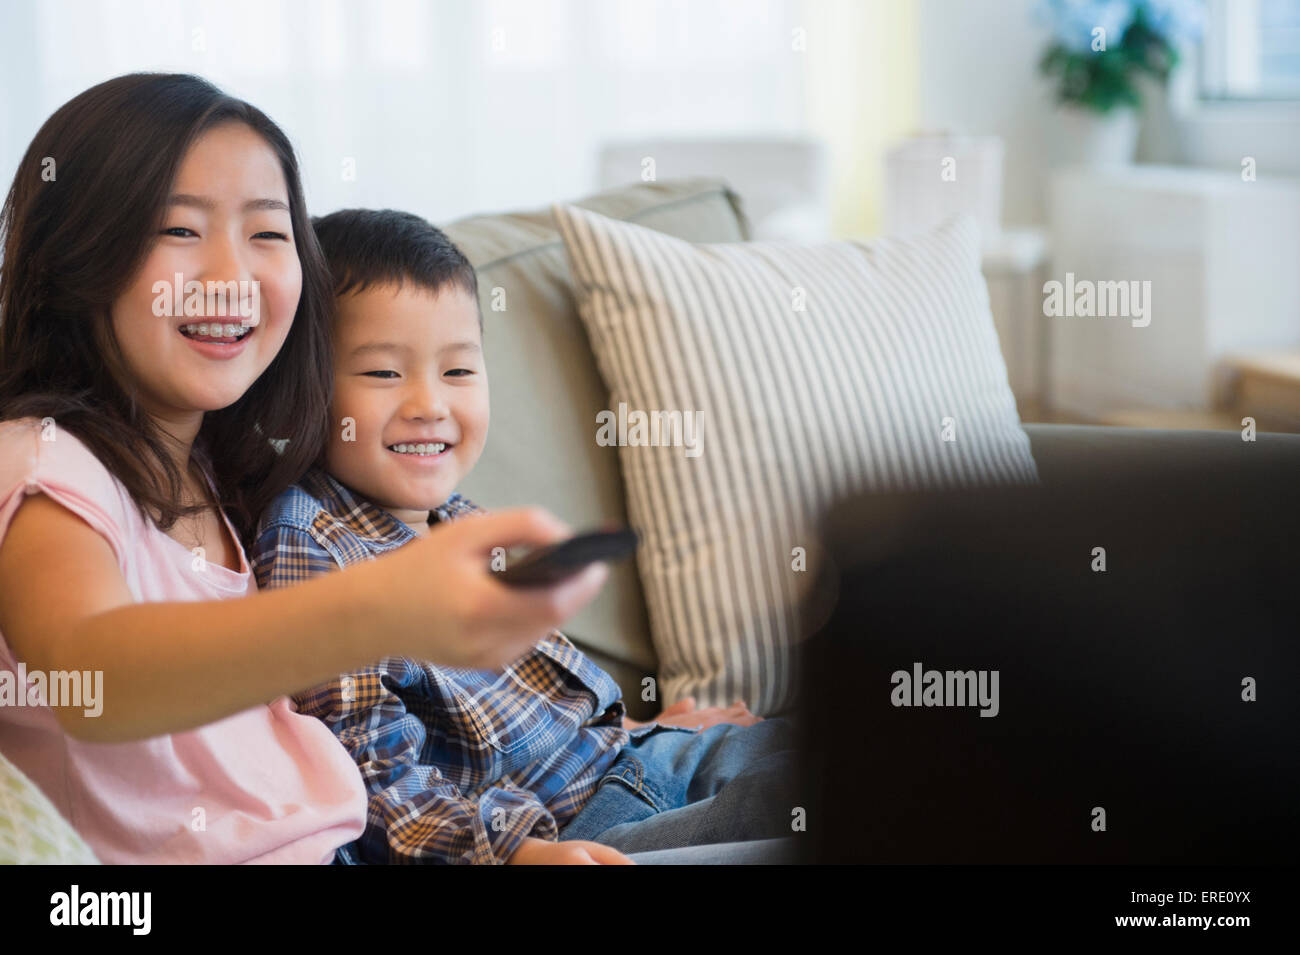 Asian brother and sister watching television on sofa Stock Photo